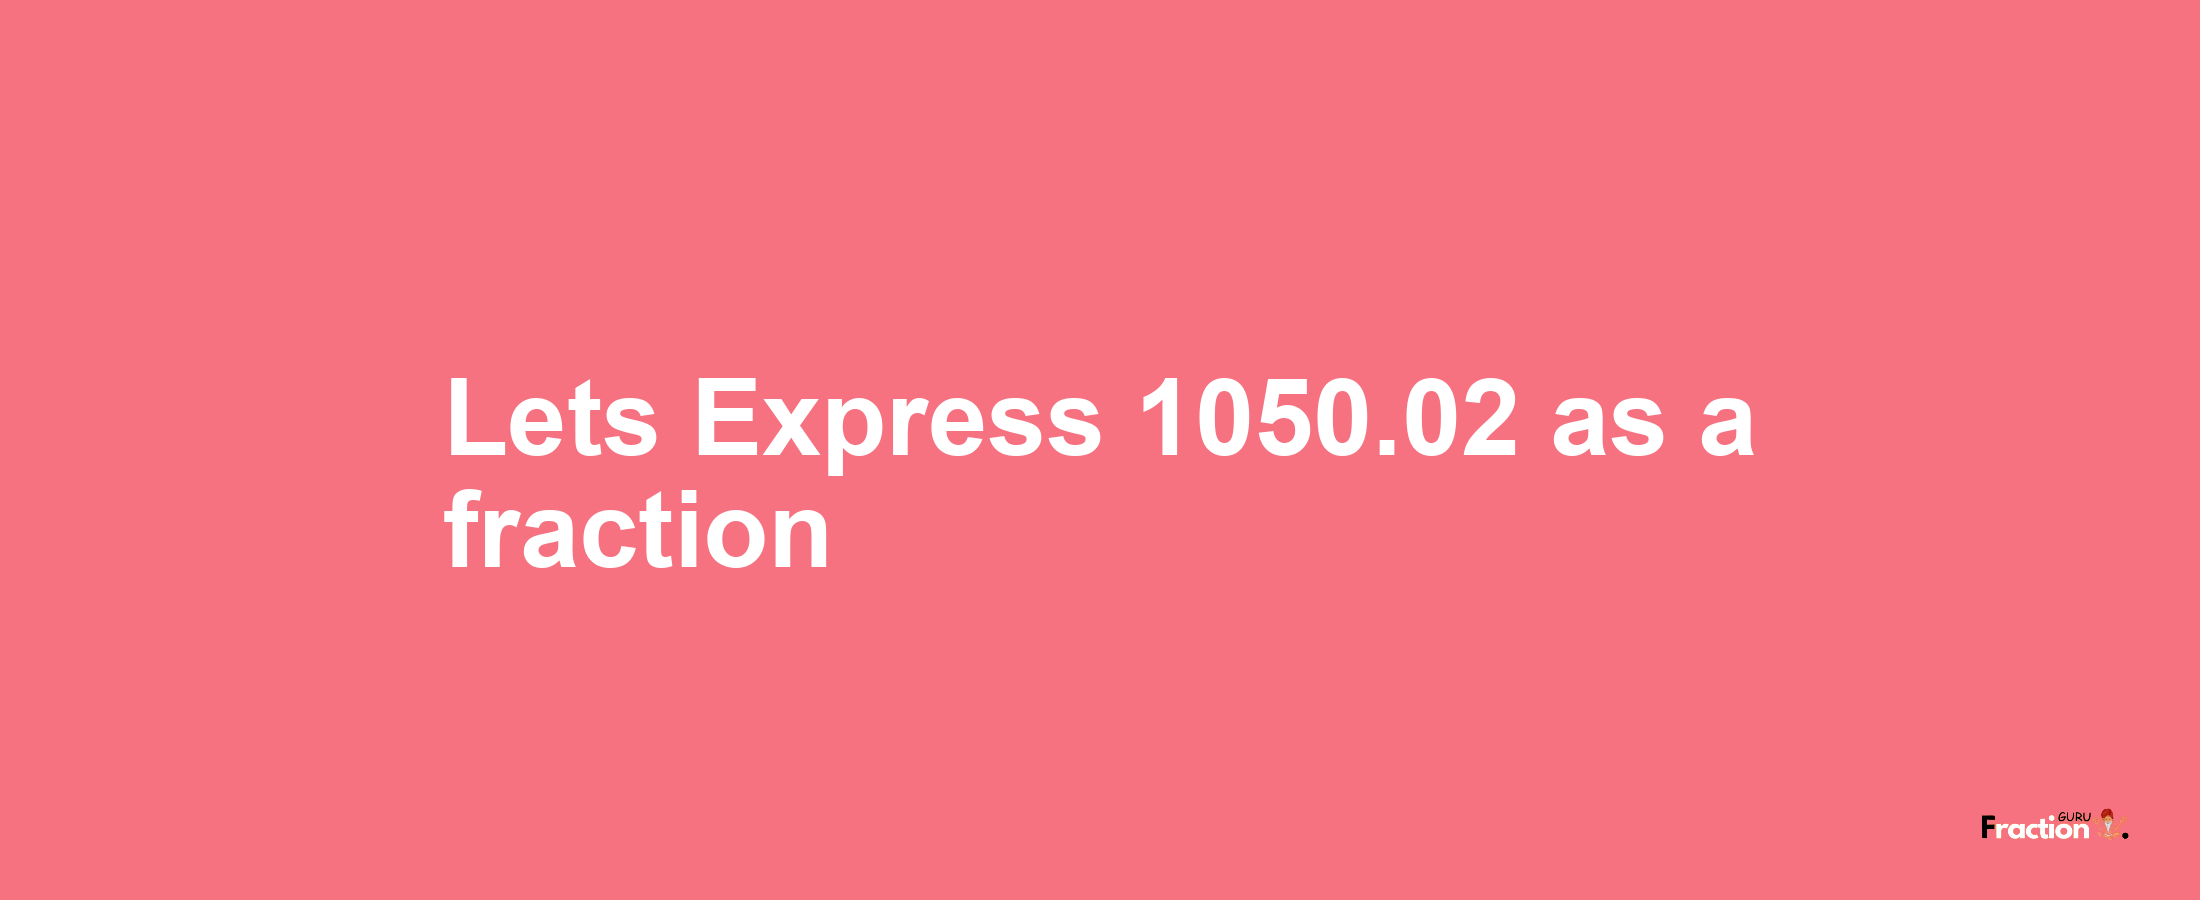 Lets Express 1050.02 as afraction